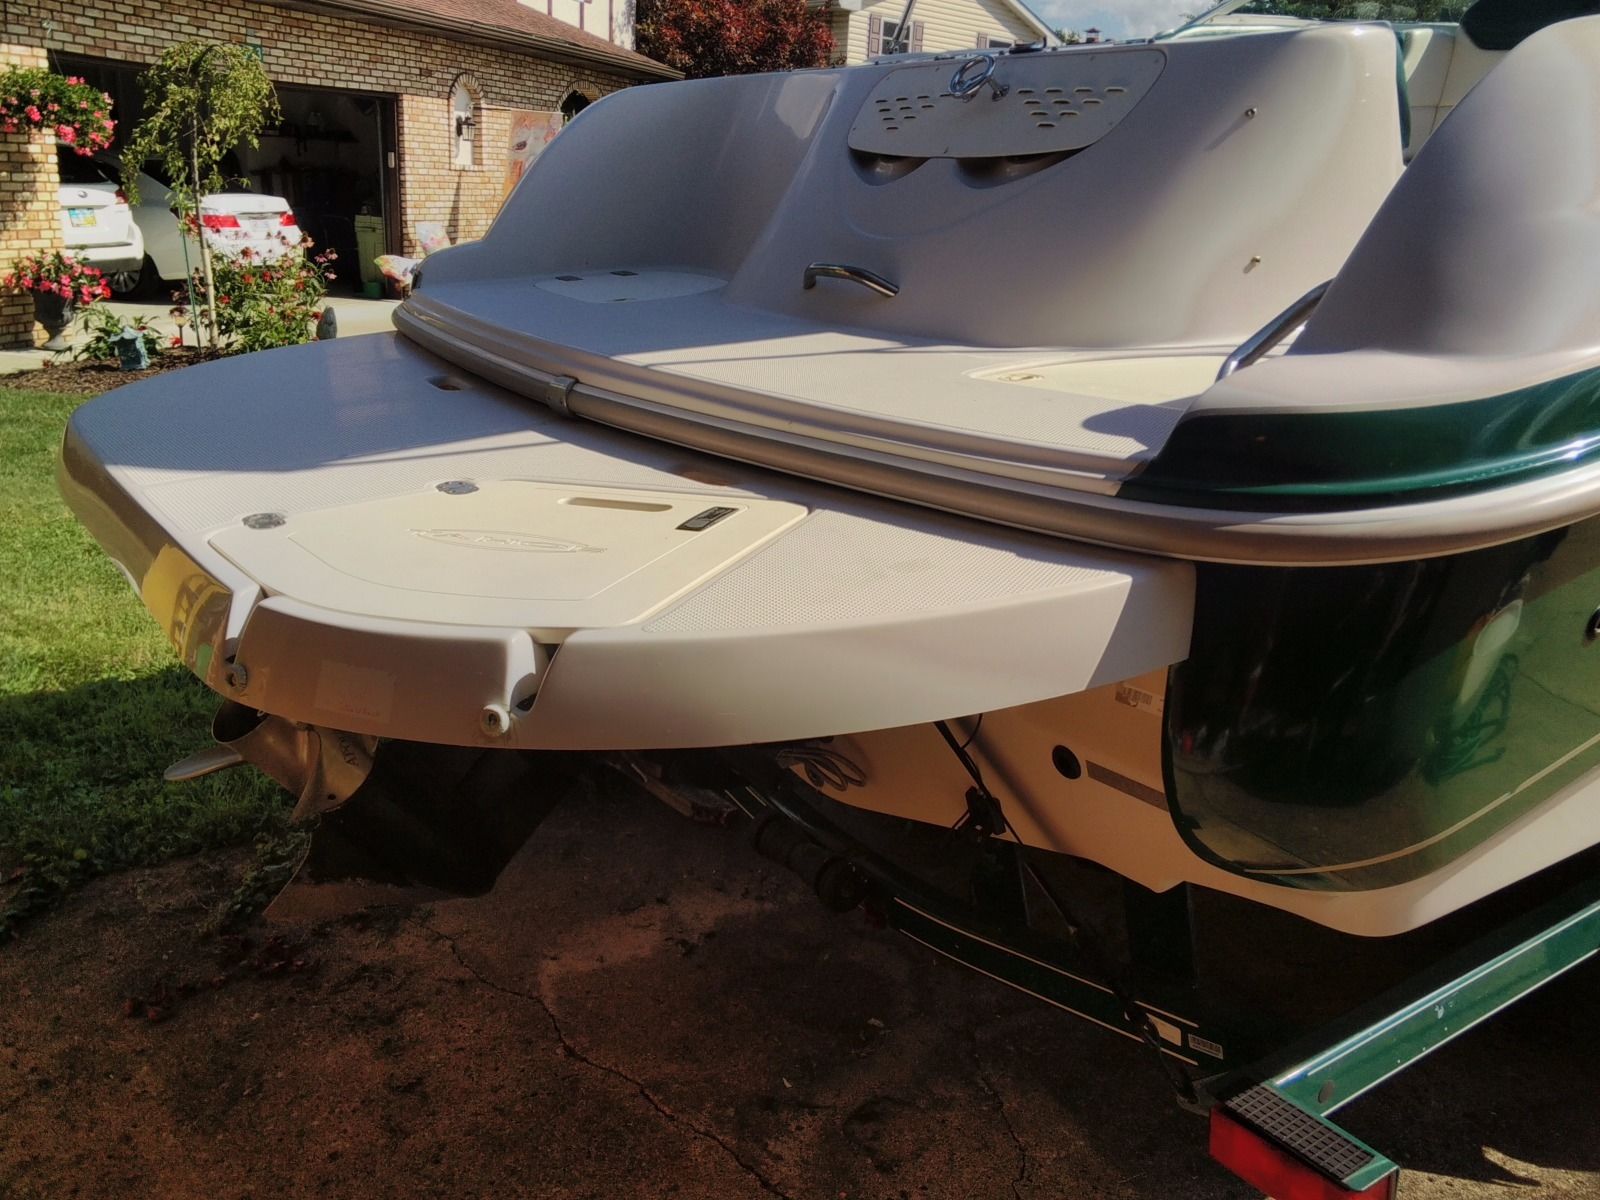 Tahoe 234 Deck Boat 2004 for sale for $18,000 - Boats-from 